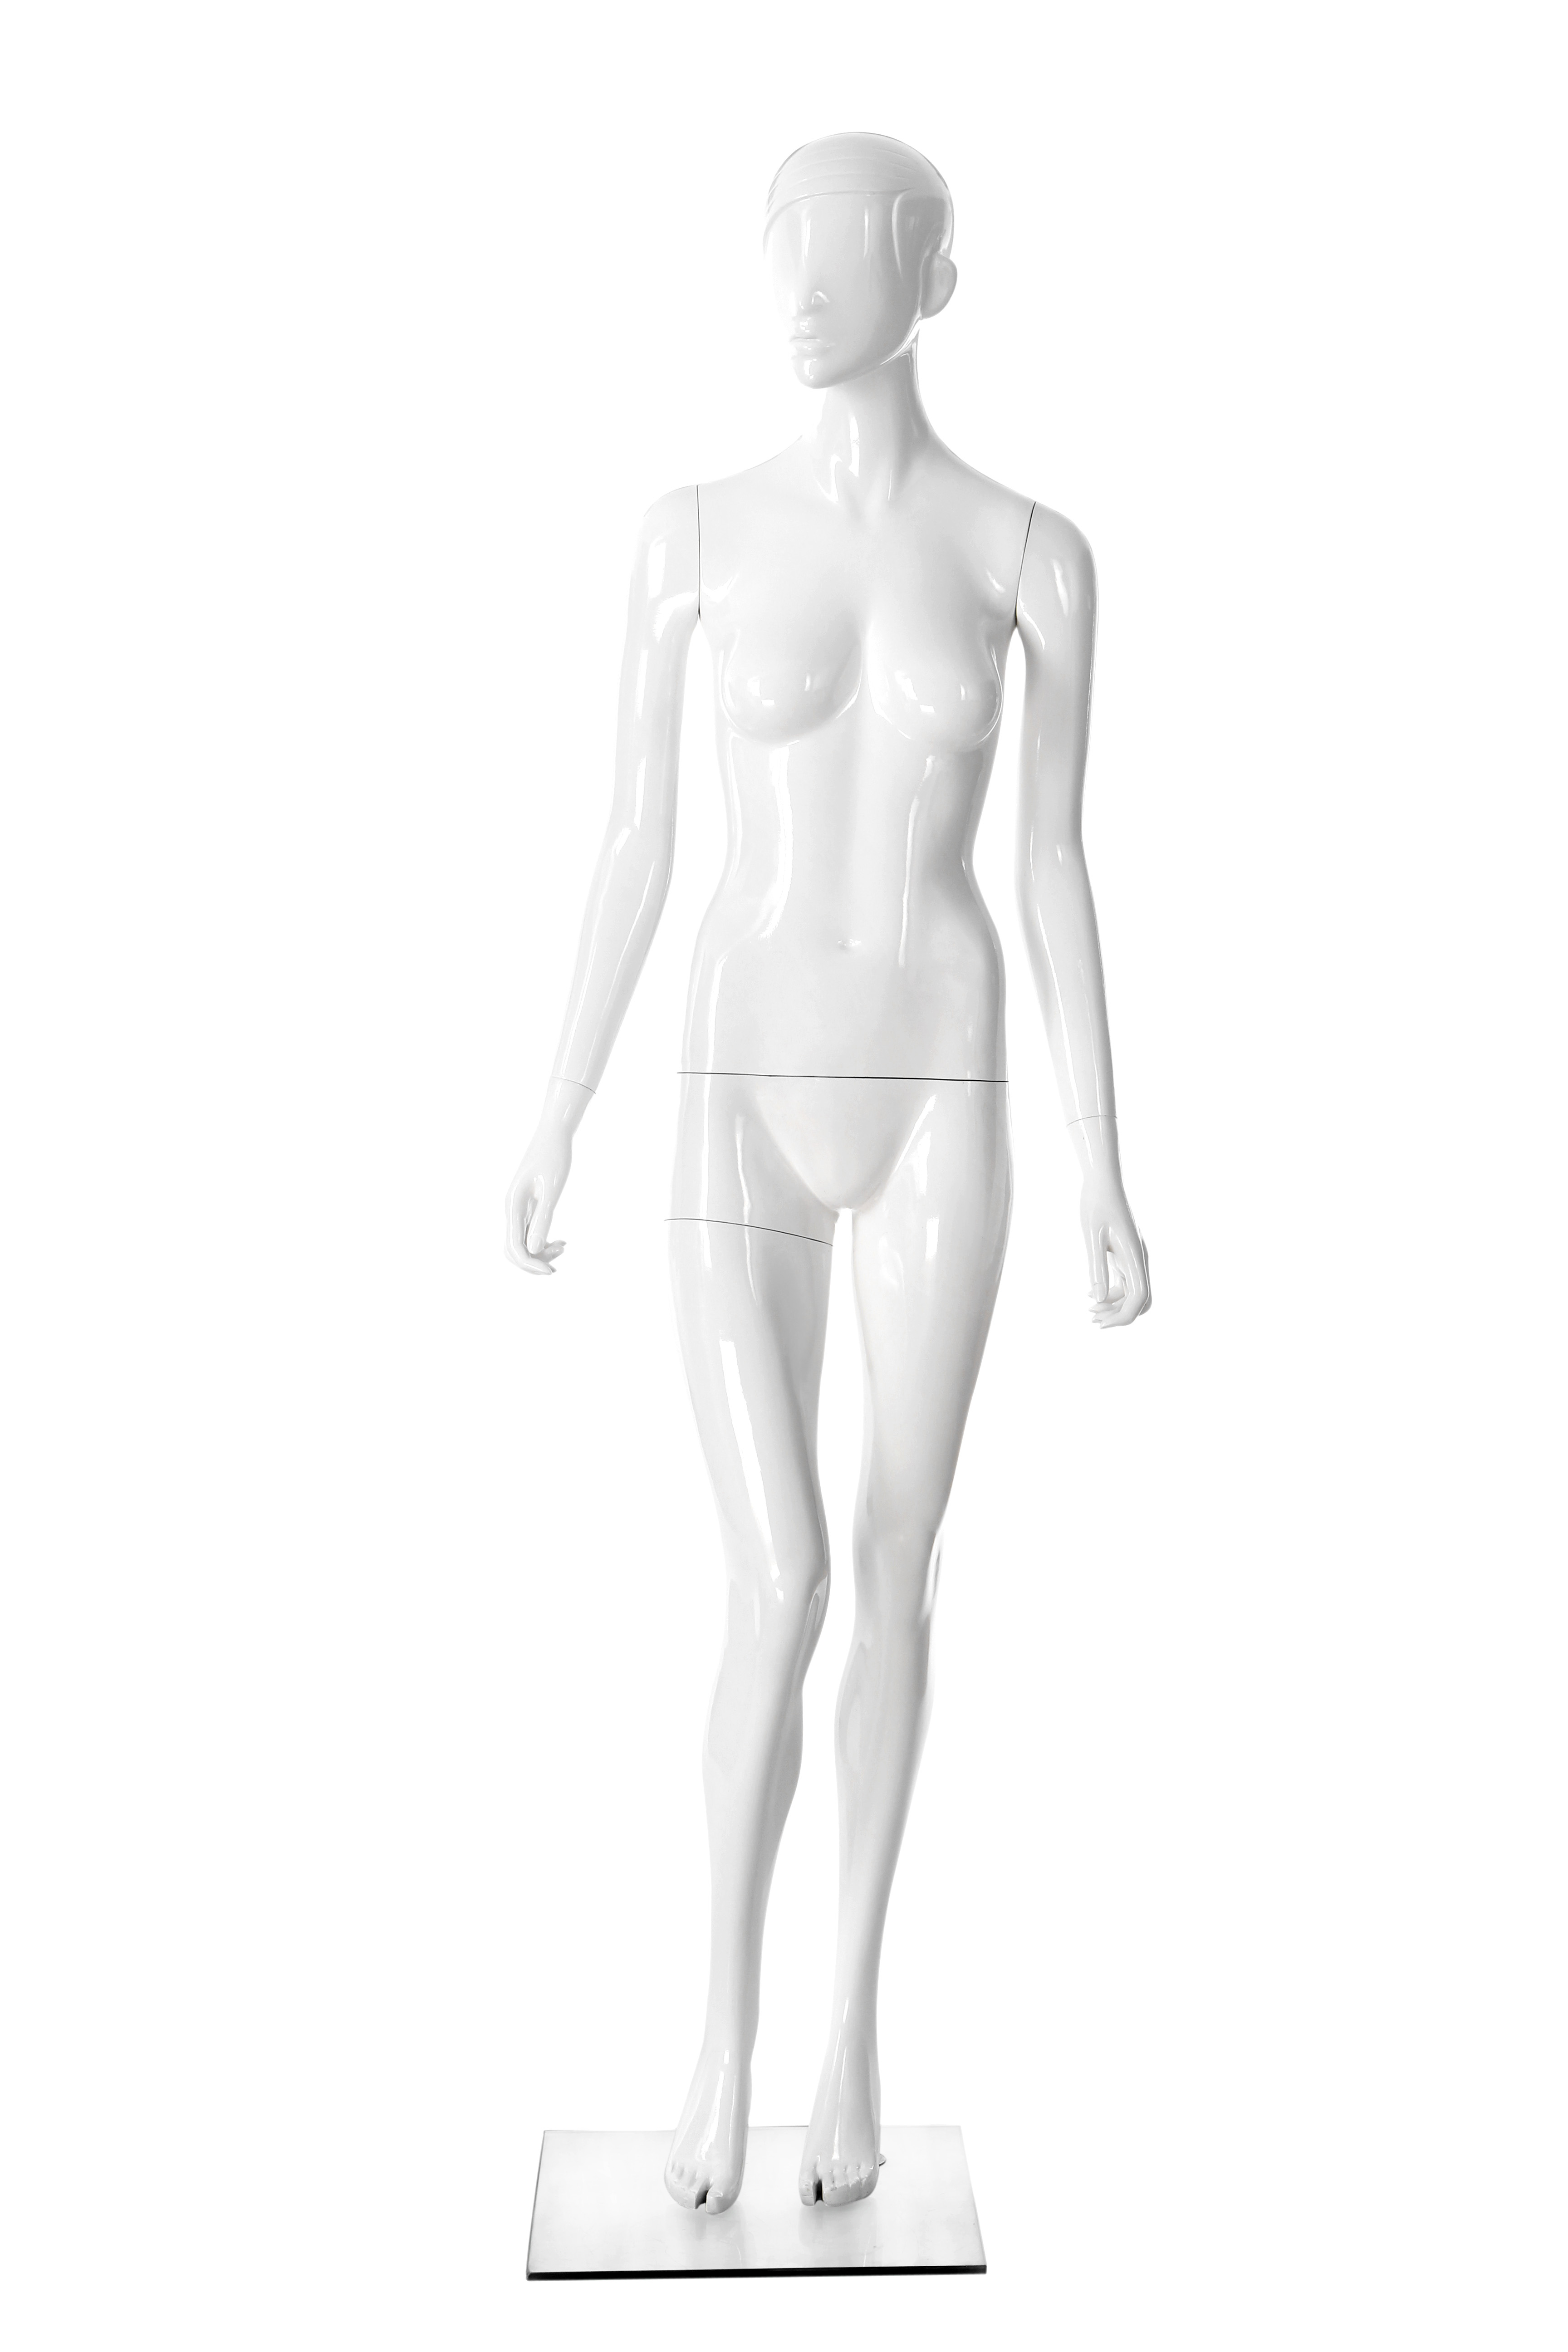 FEMALE MANNEQUIN GL3 - Showcases and Mannequin store